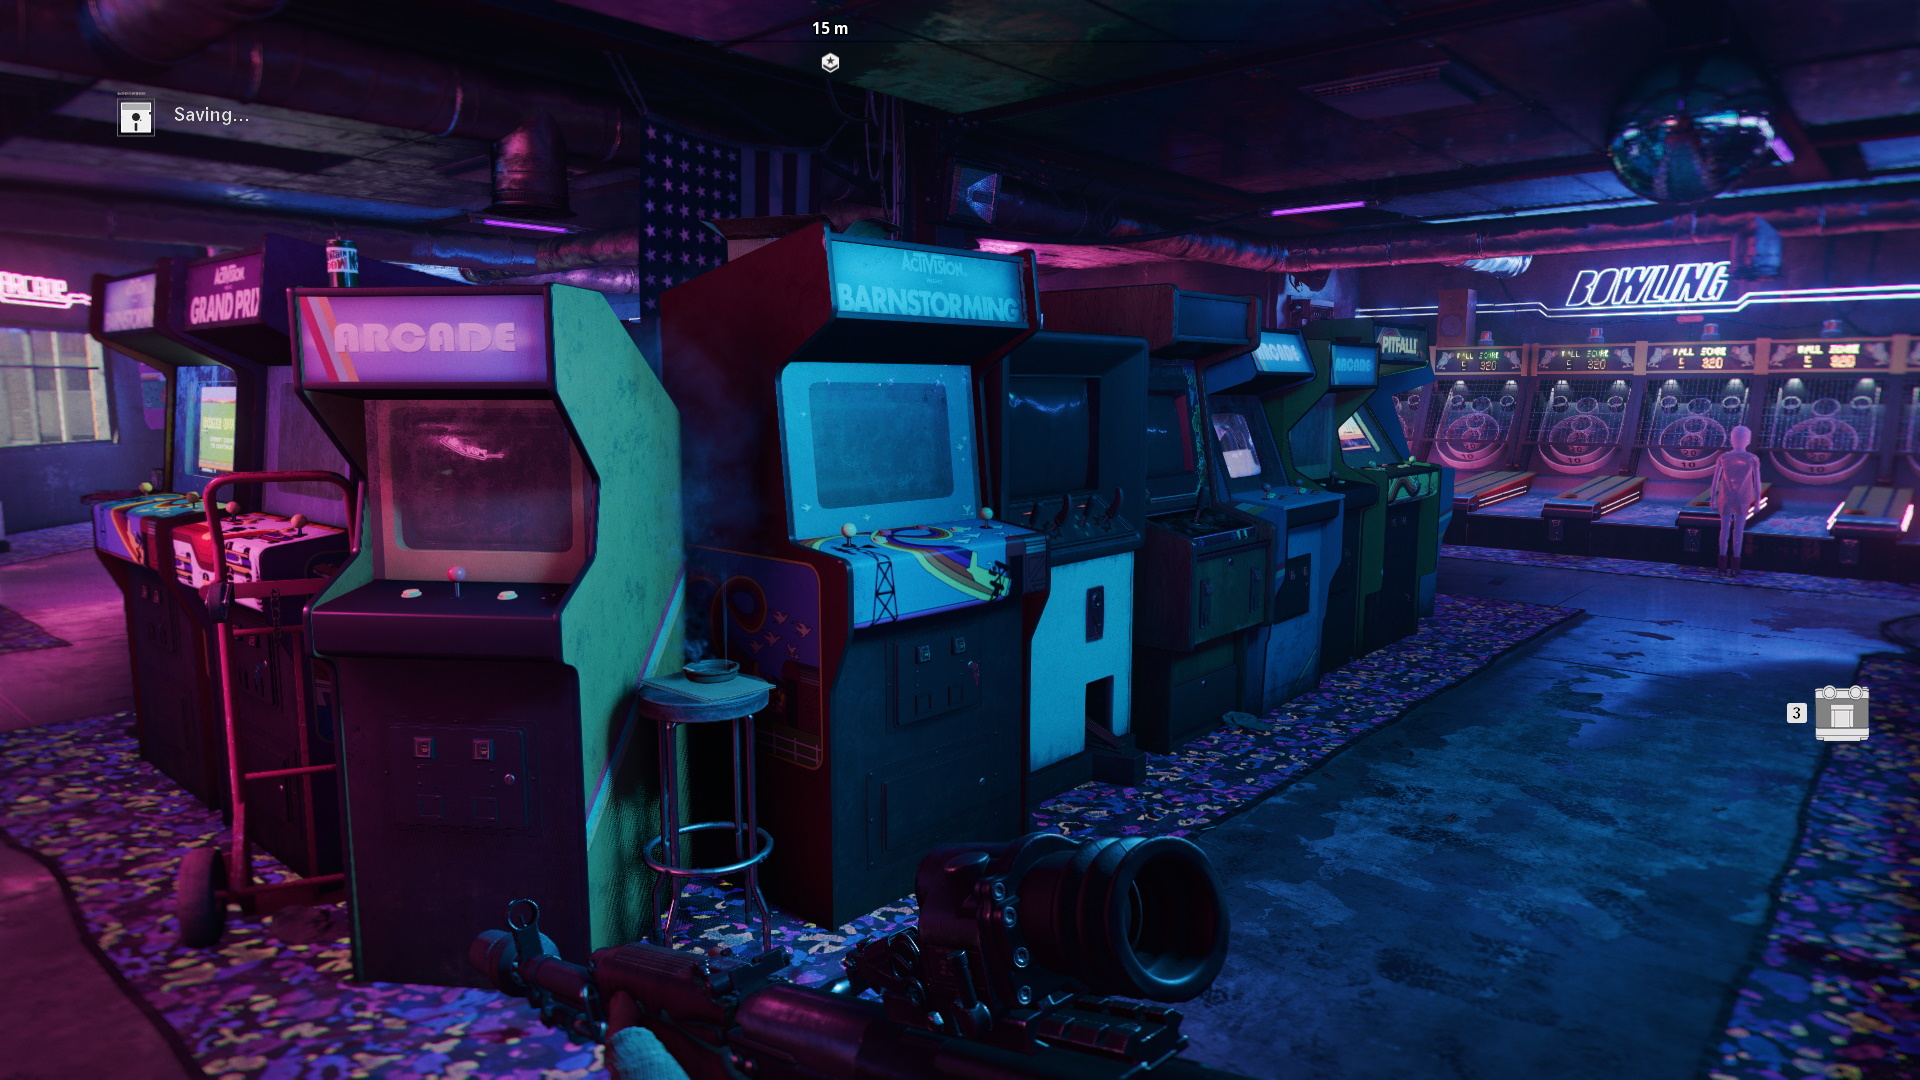 Arcade machines in Call of Duty - you'll need to pass this bit to get to Operation Chaos evidence.